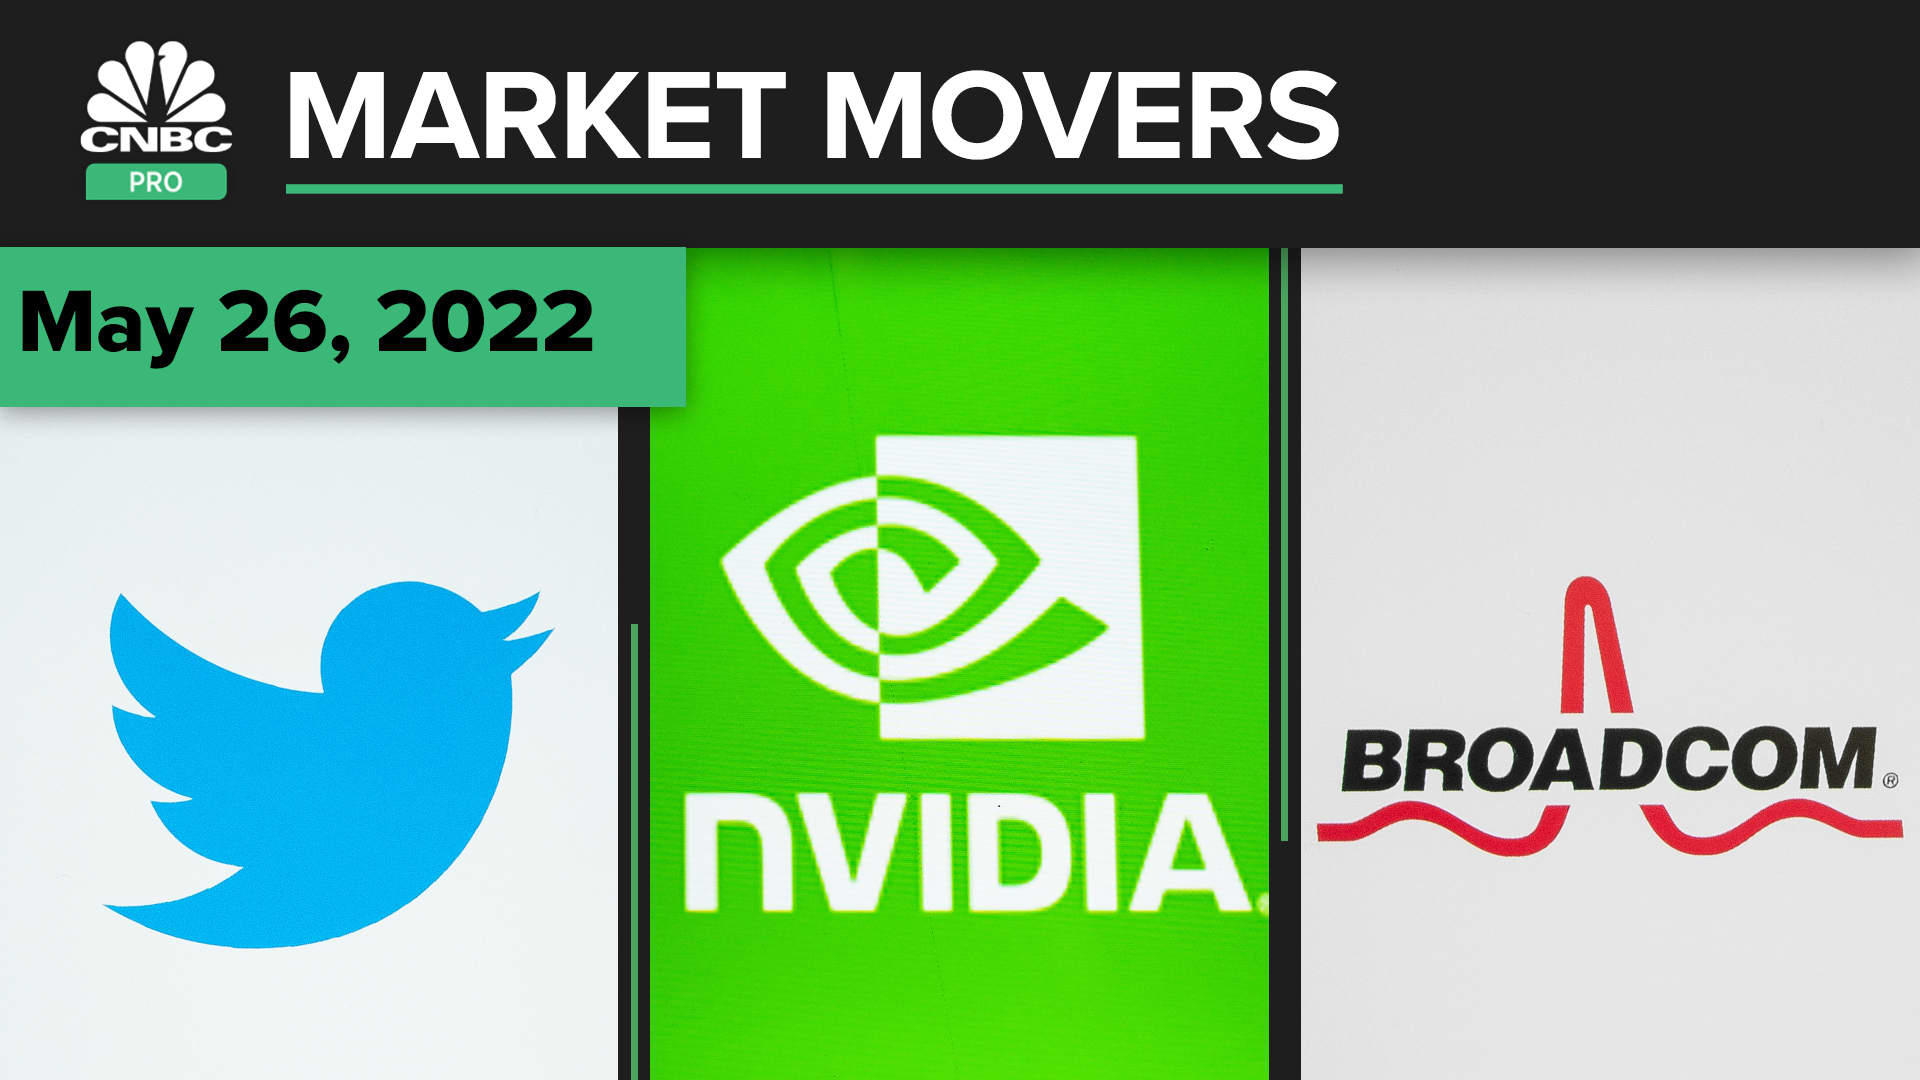 Best trades on CNBC Thursday: Nvidia earnings take center stage, pros discuss what to buy in this winning week